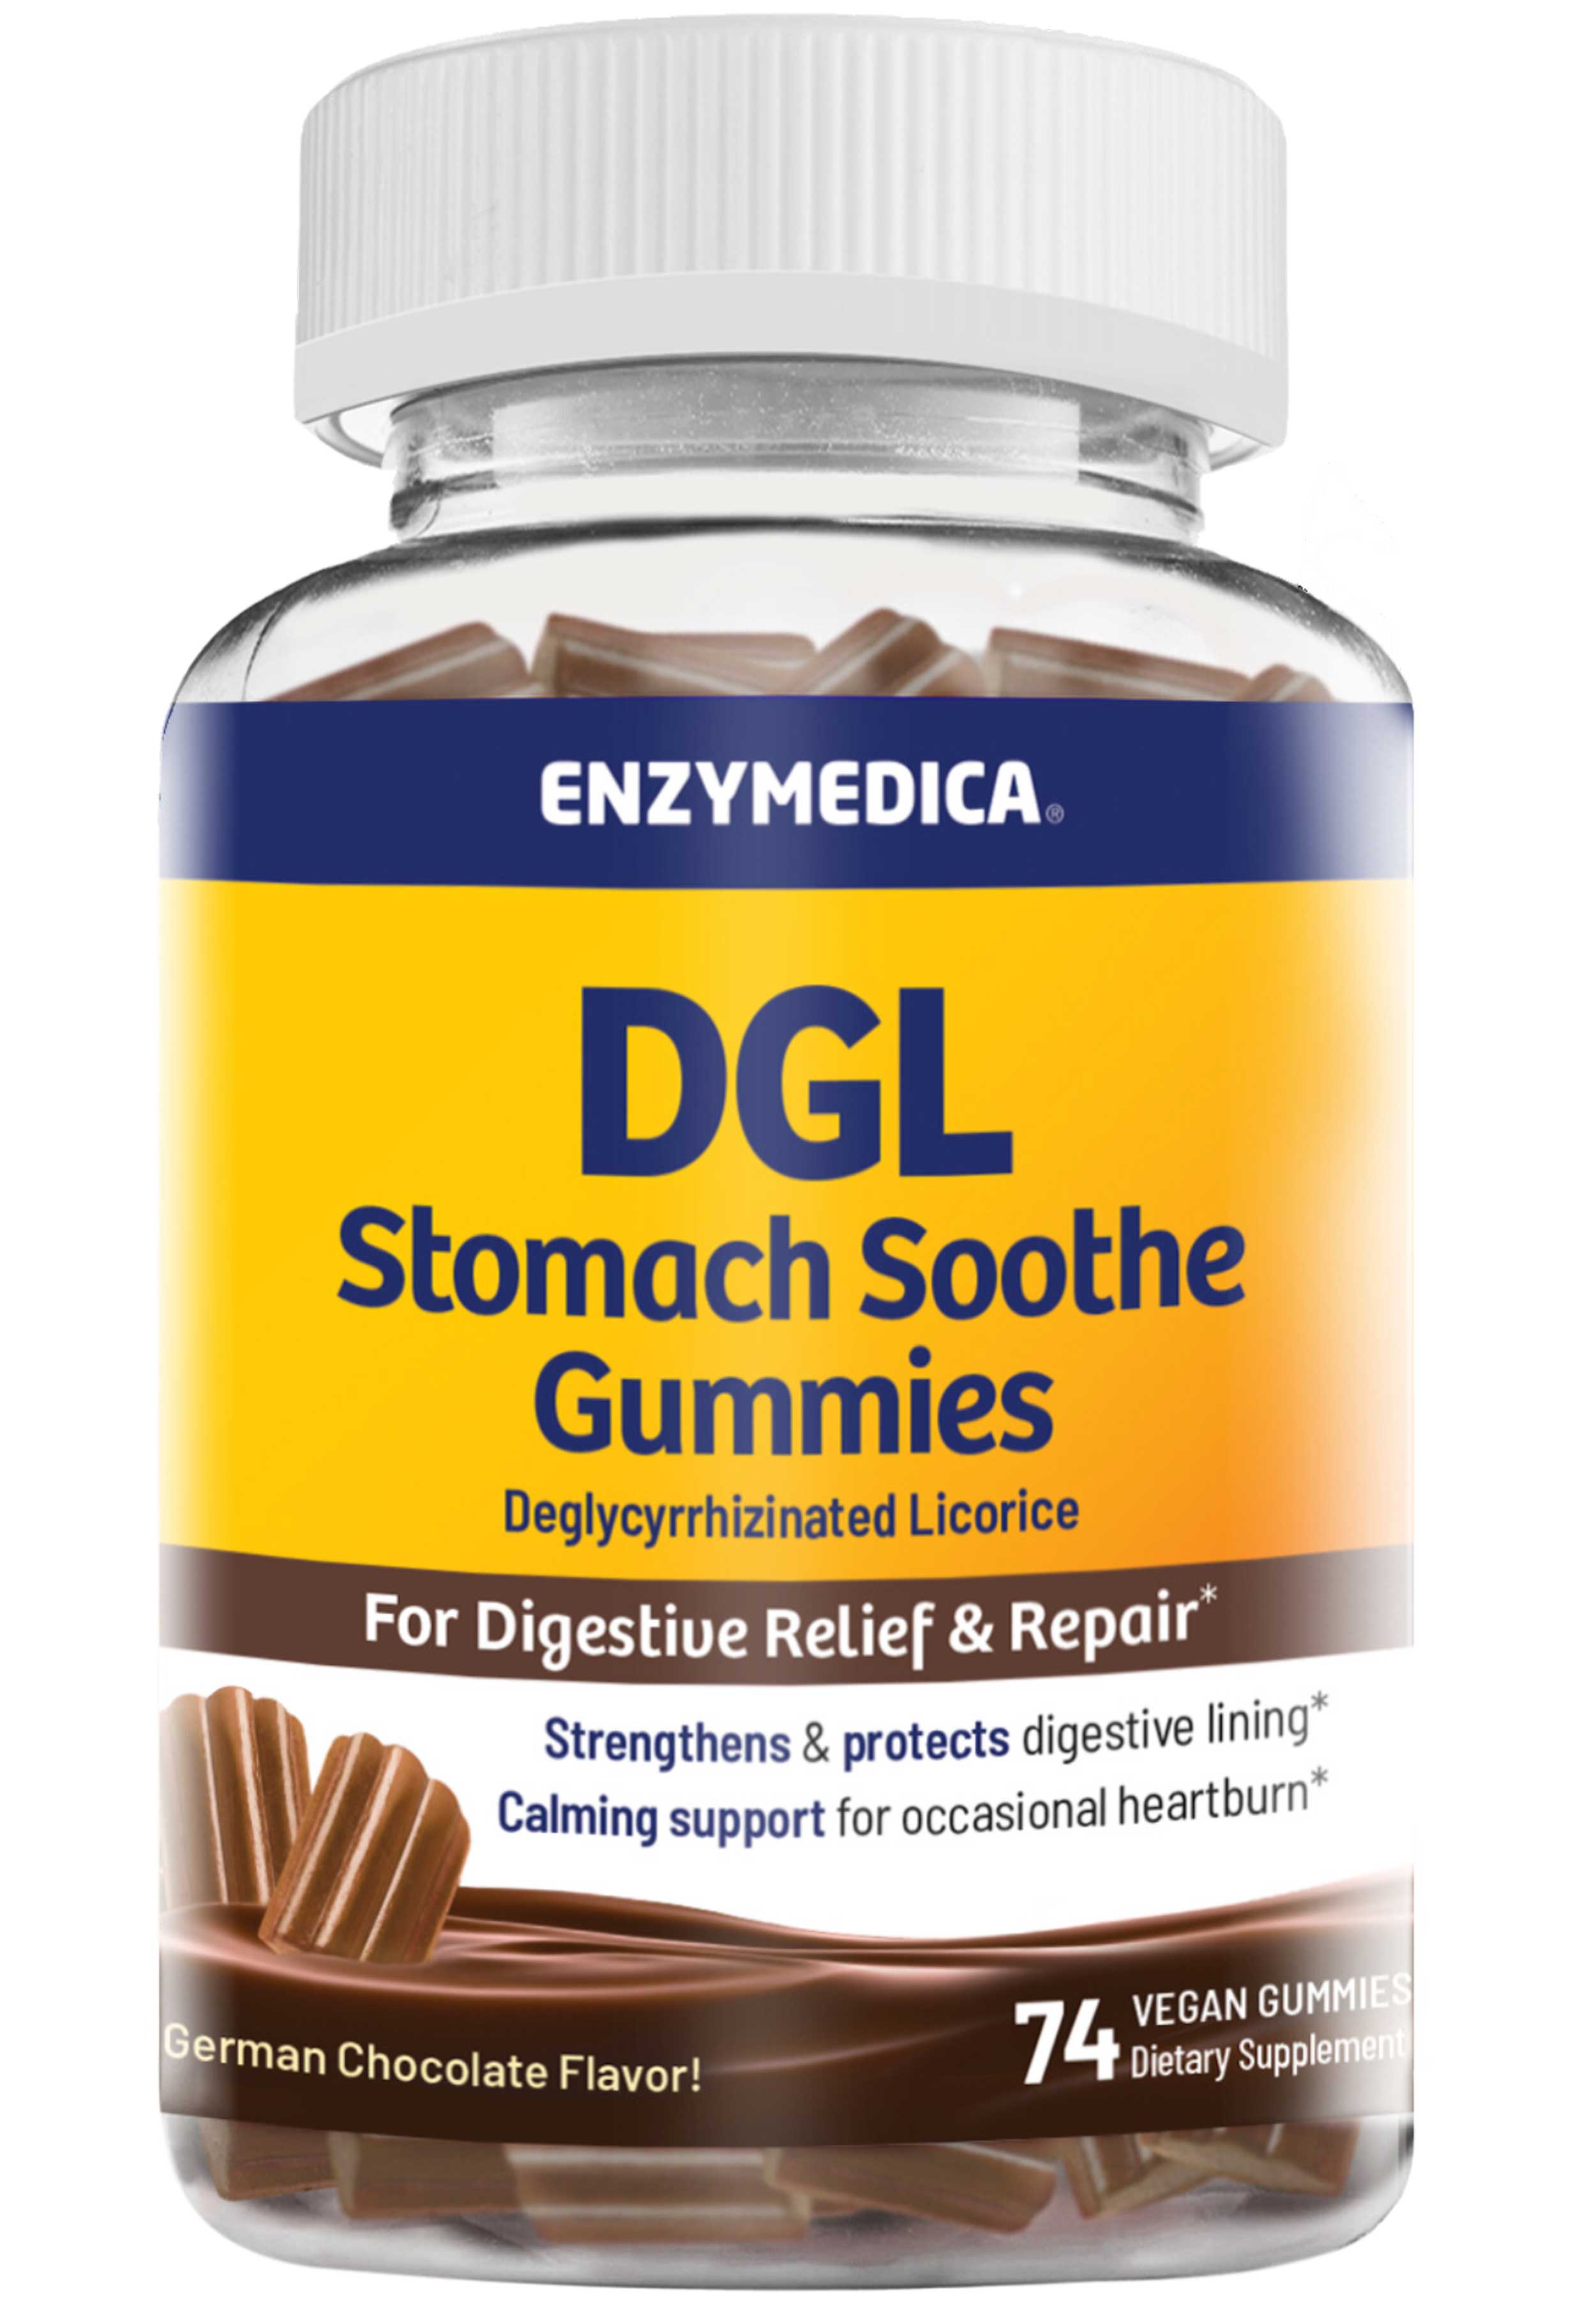 Enzymedica DGL Stomach Soothe